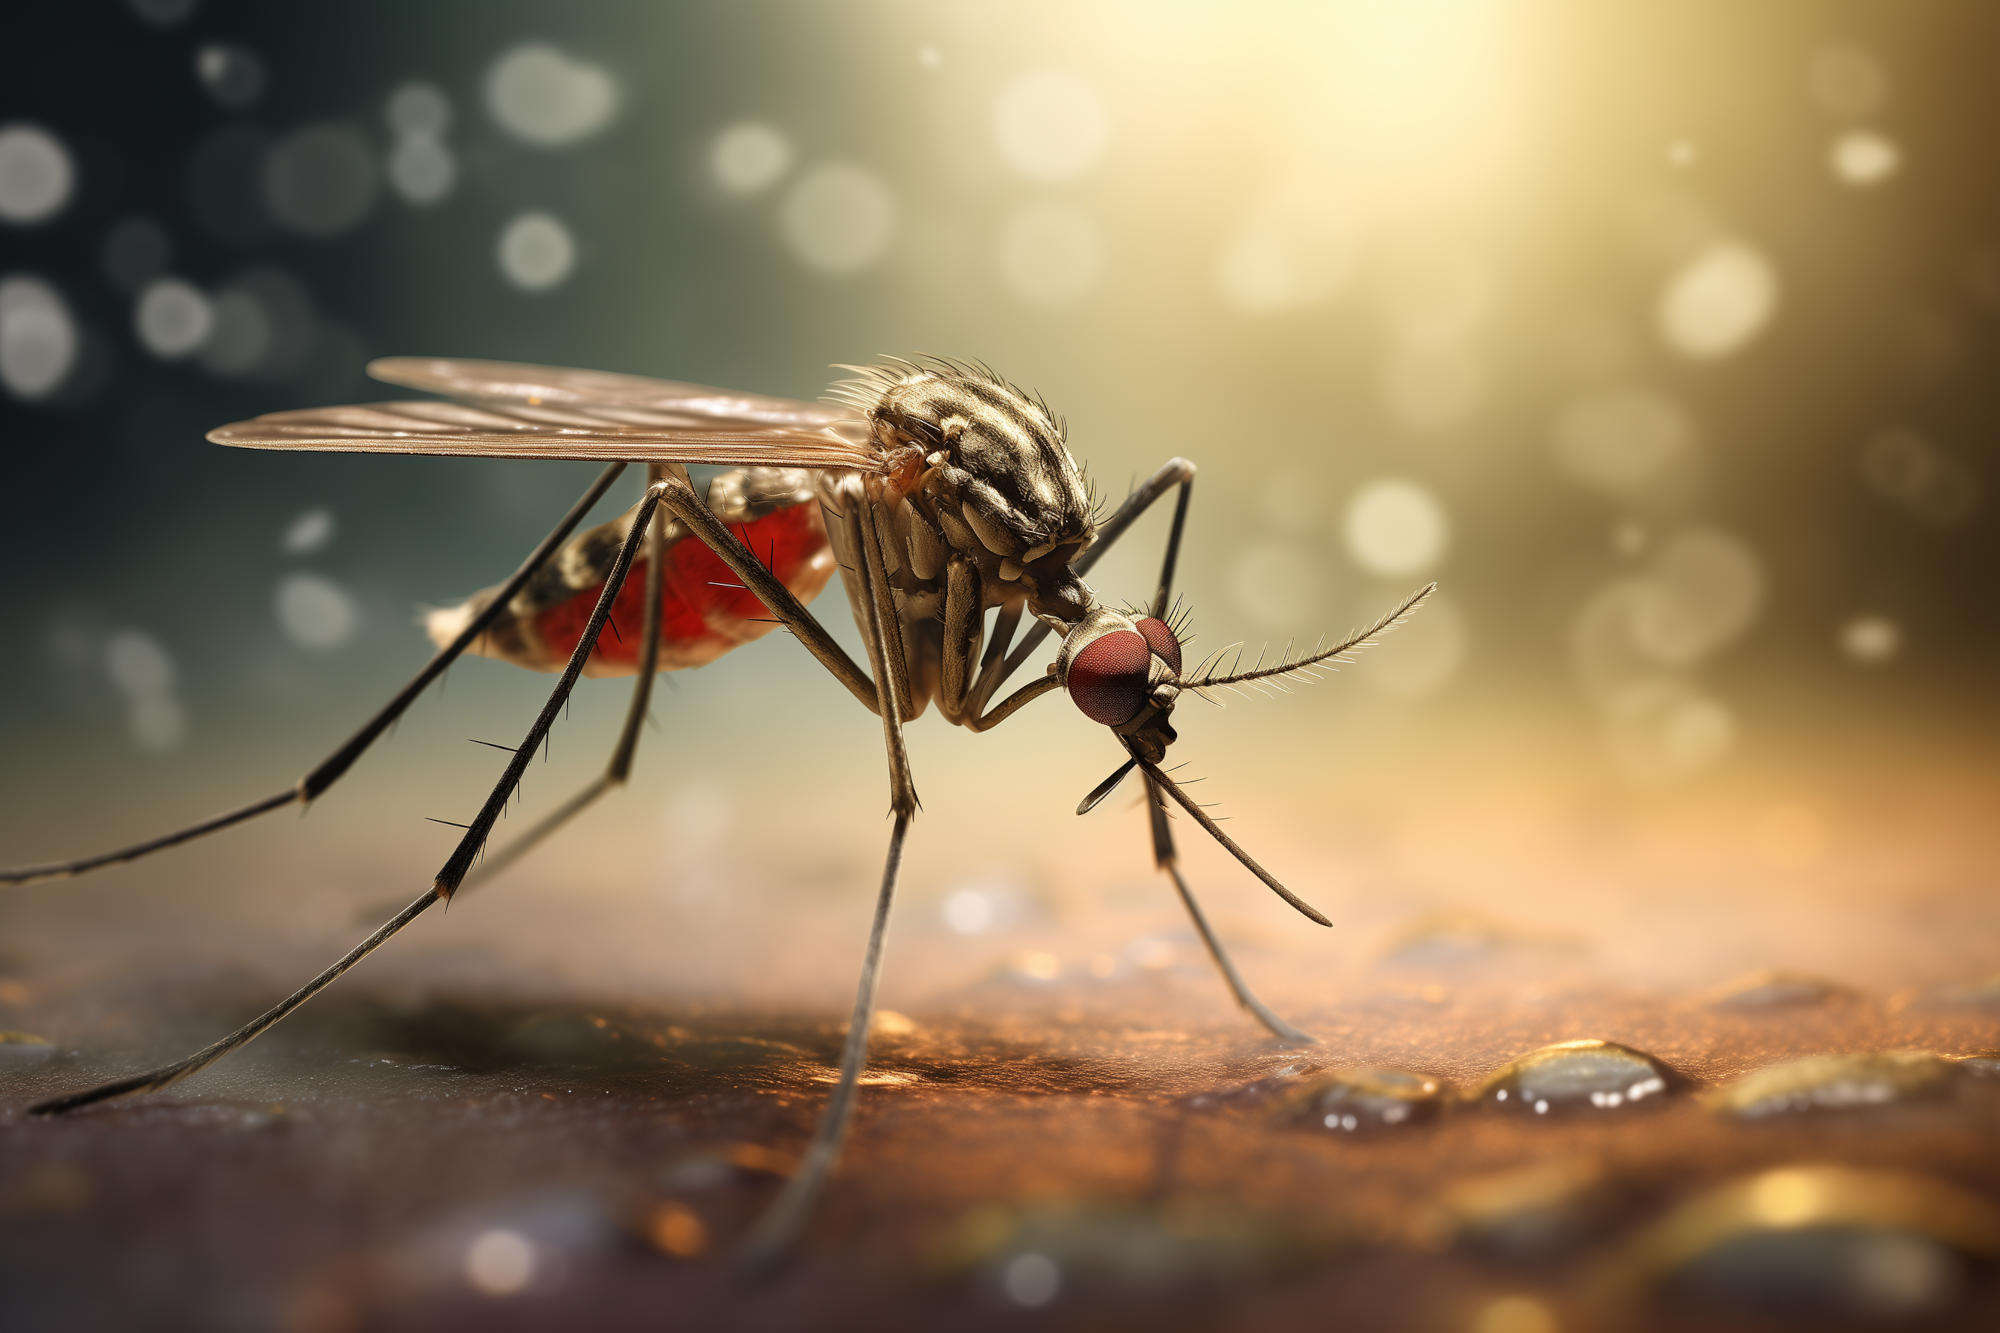 Scientists reveal a surprisingly simple potential solution to malaria